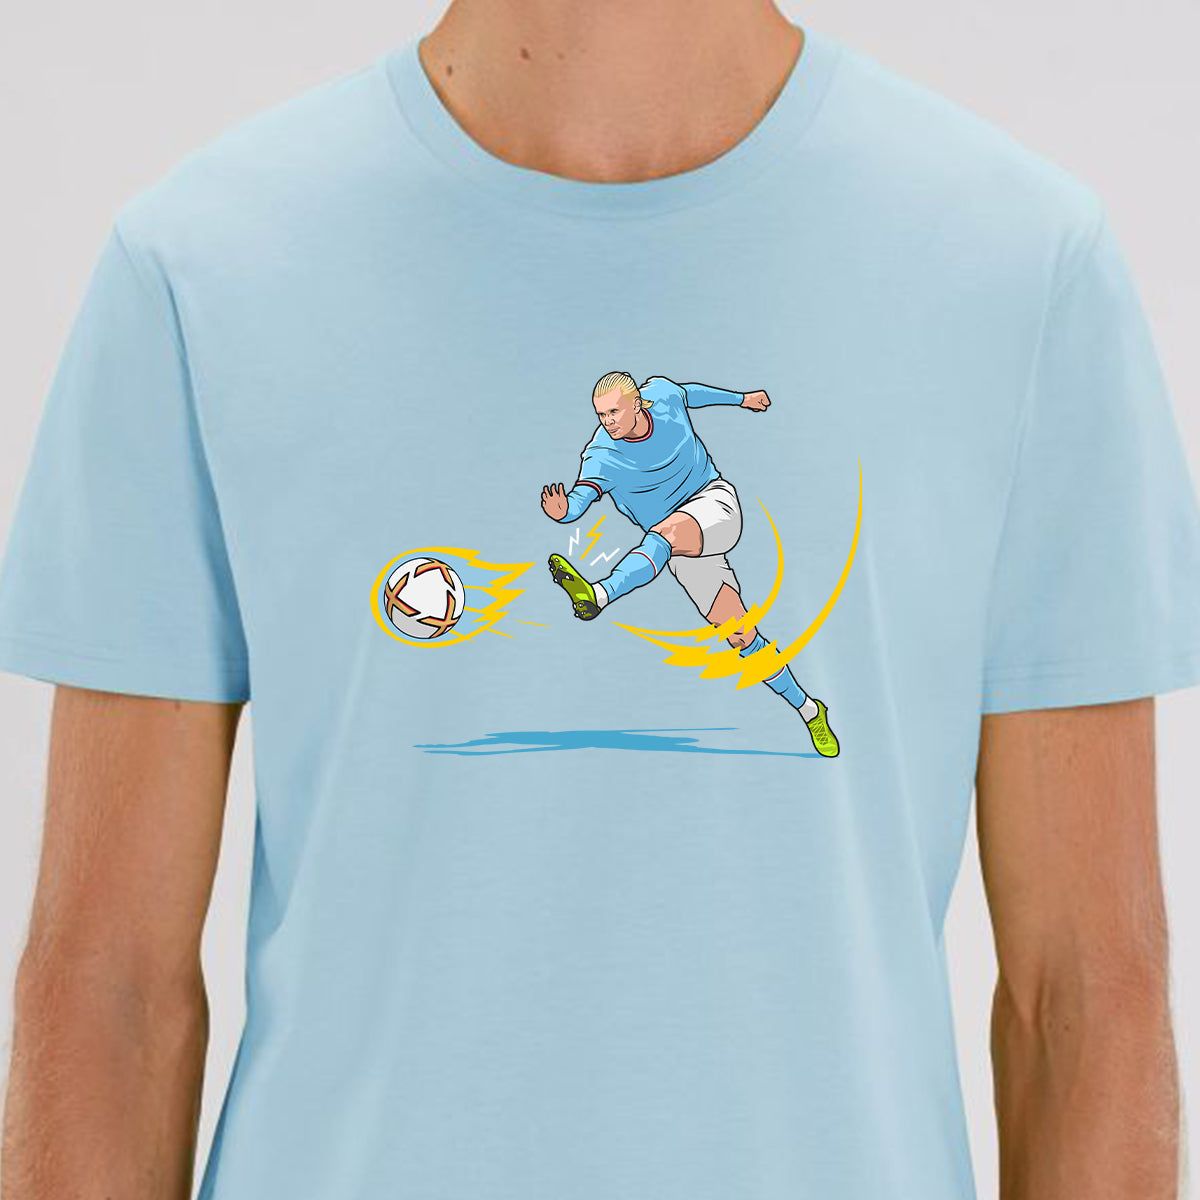 Erling Haaland t-shirt in sky blue available on the GMS Shop